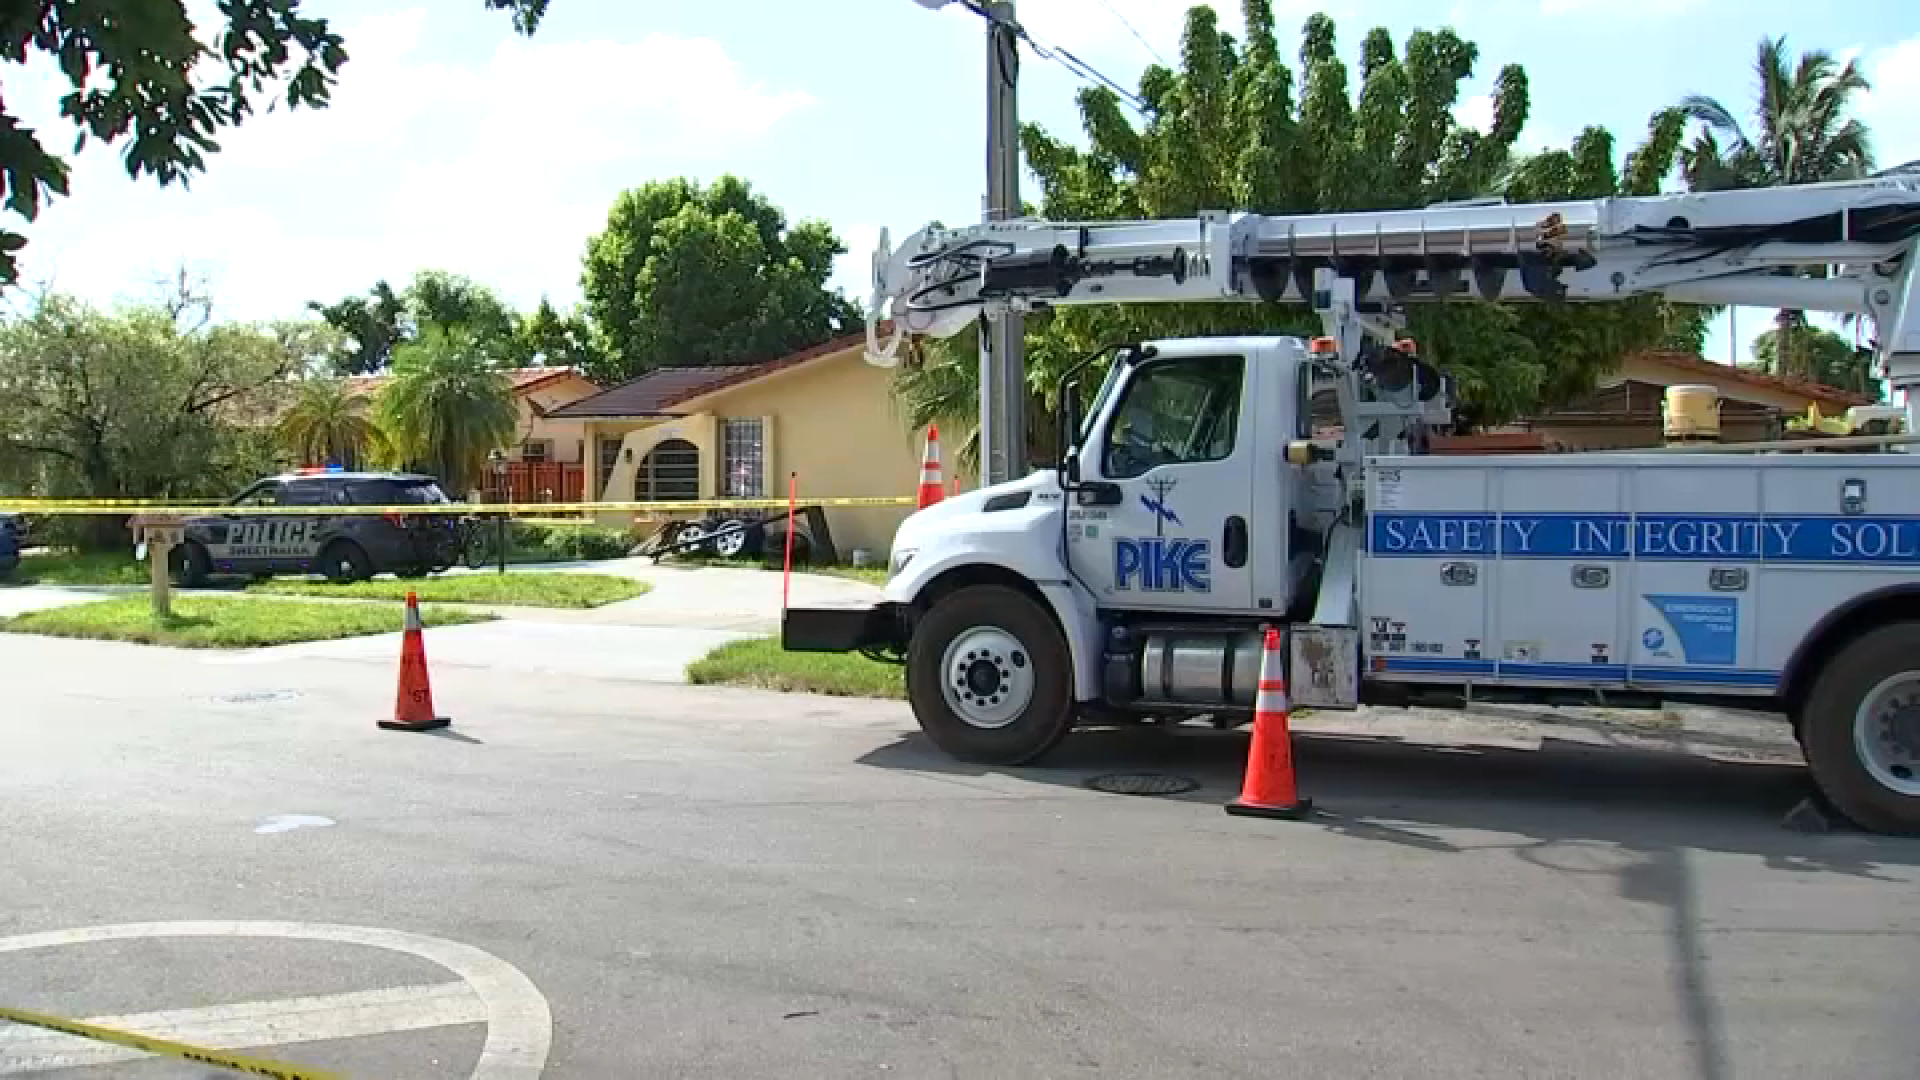 Man dies after being shocked while working on power lines in Sweetwater